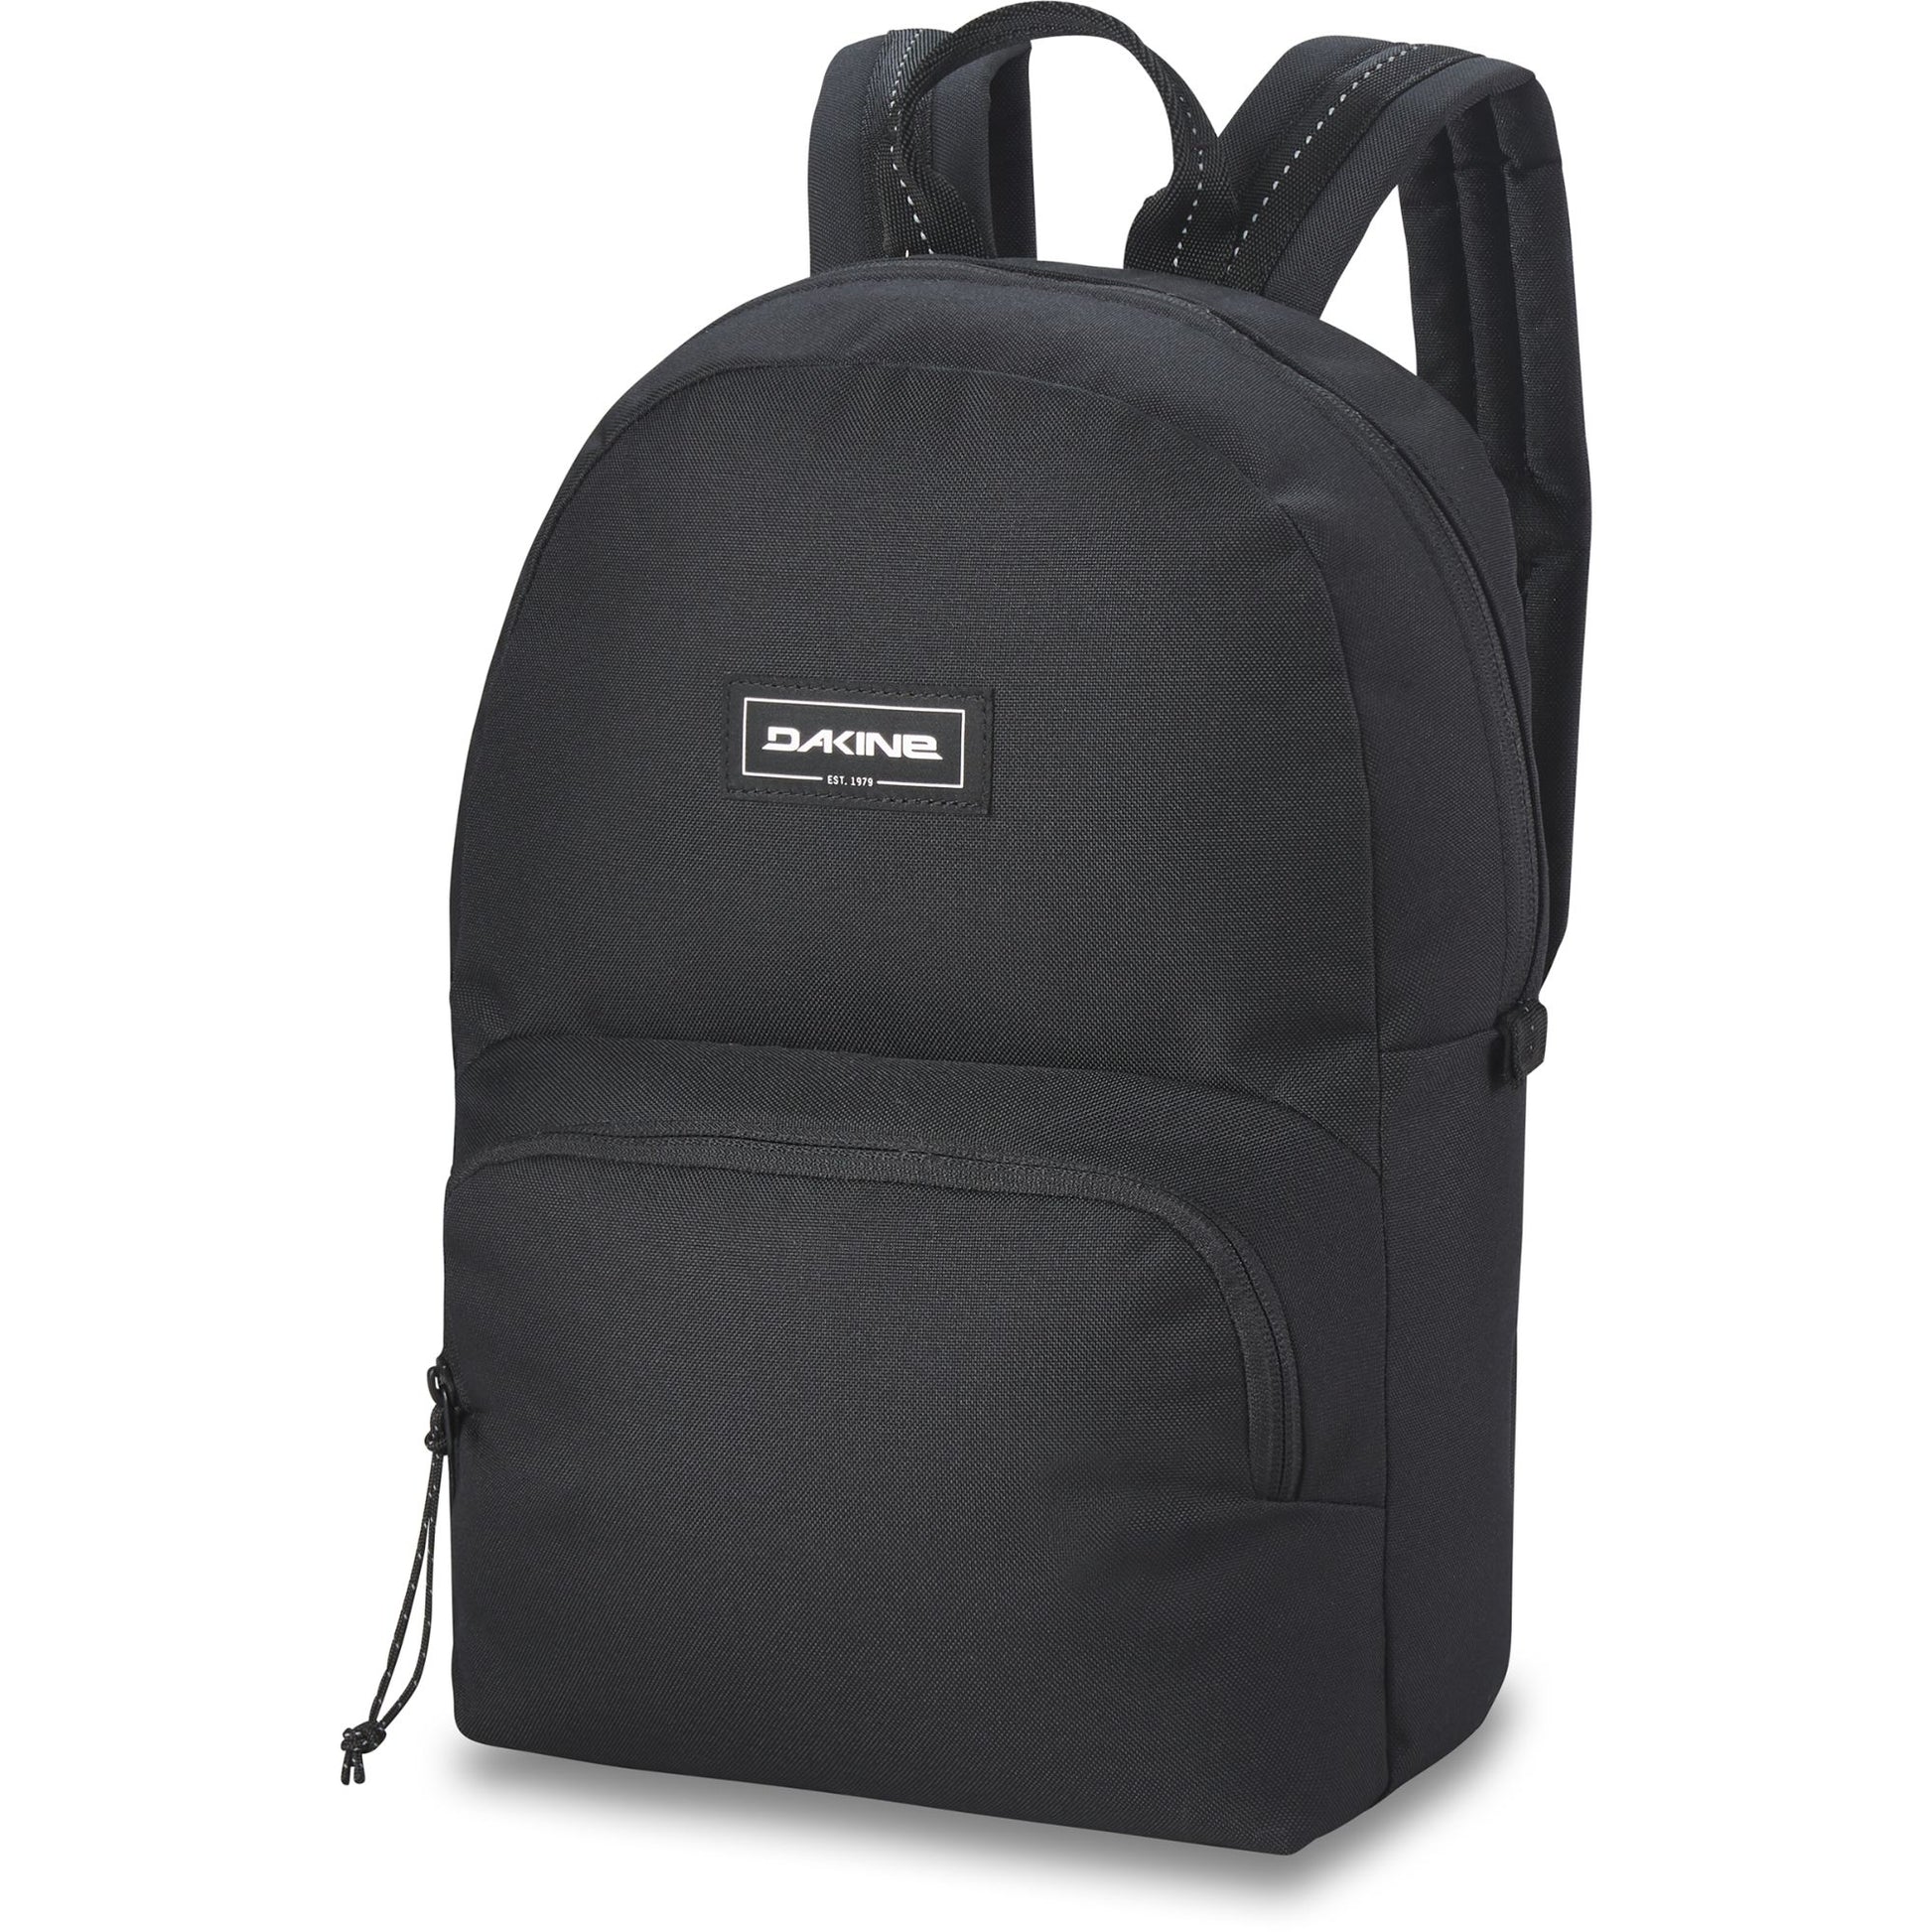 Dakine Youth Cubby Pack 12L Black OS Bags & Packs